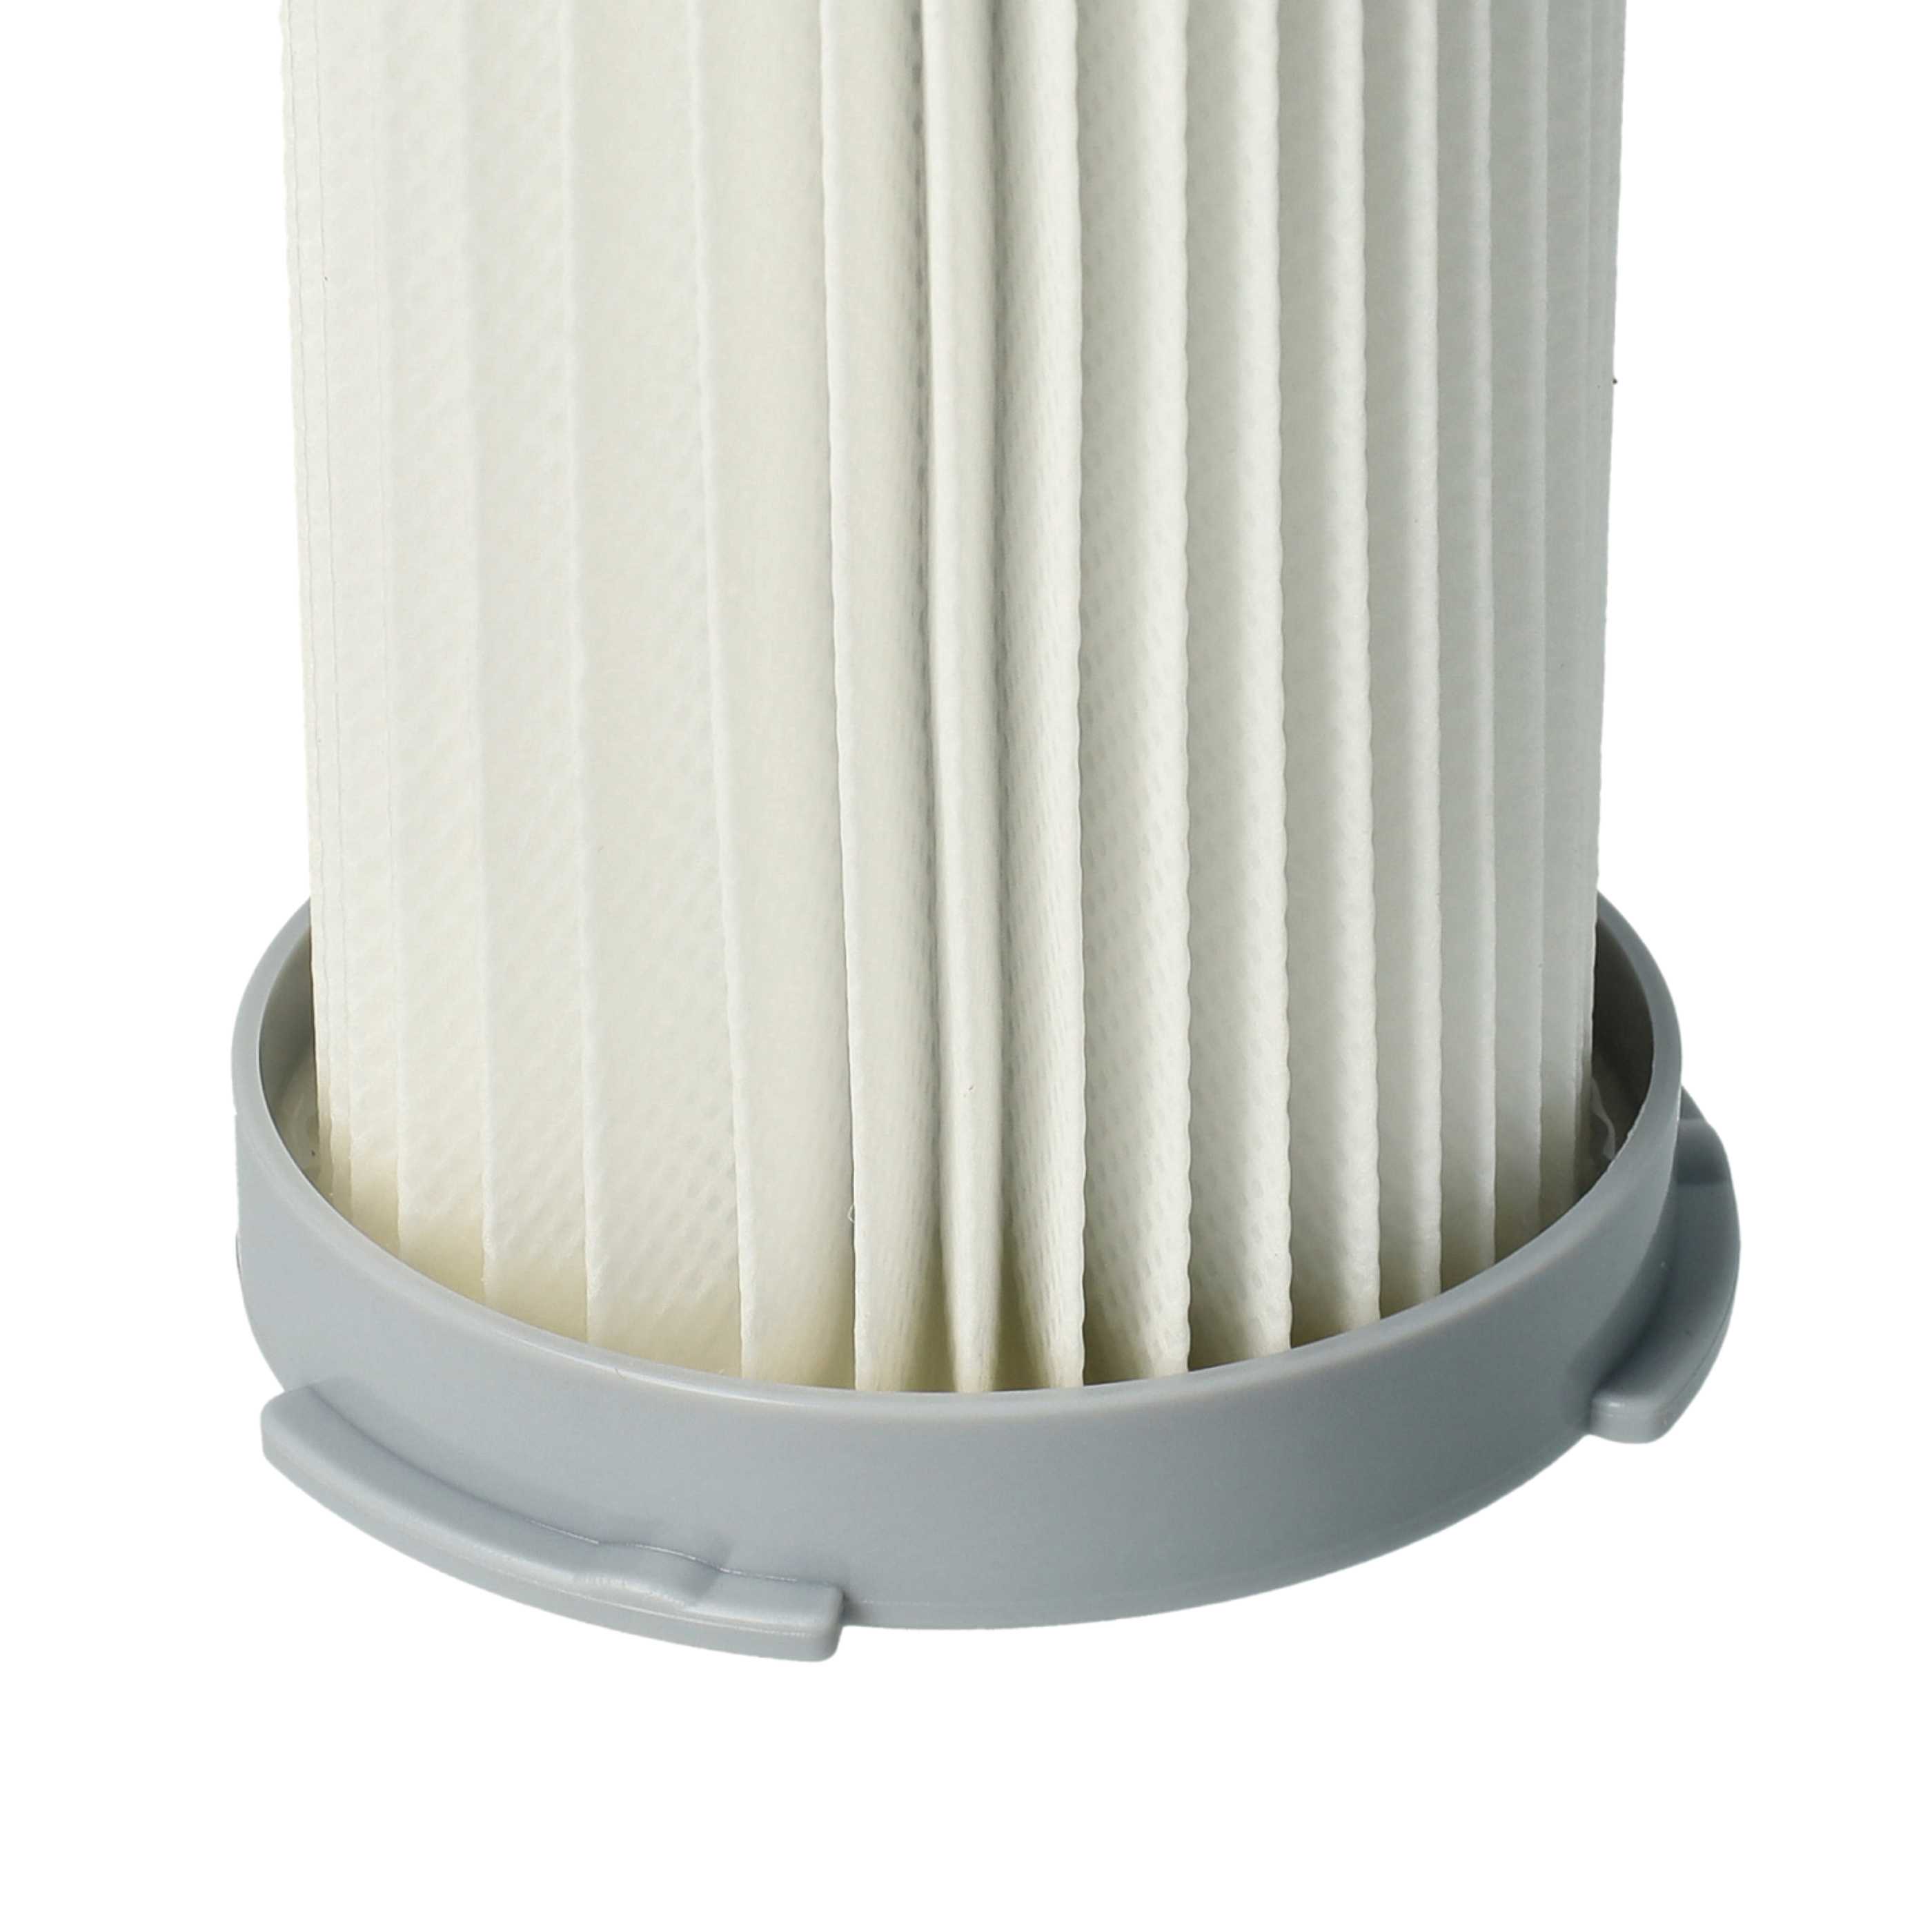 3x exhaust filter replaces Electrolux EF75B for AEGVacuum Cleaner